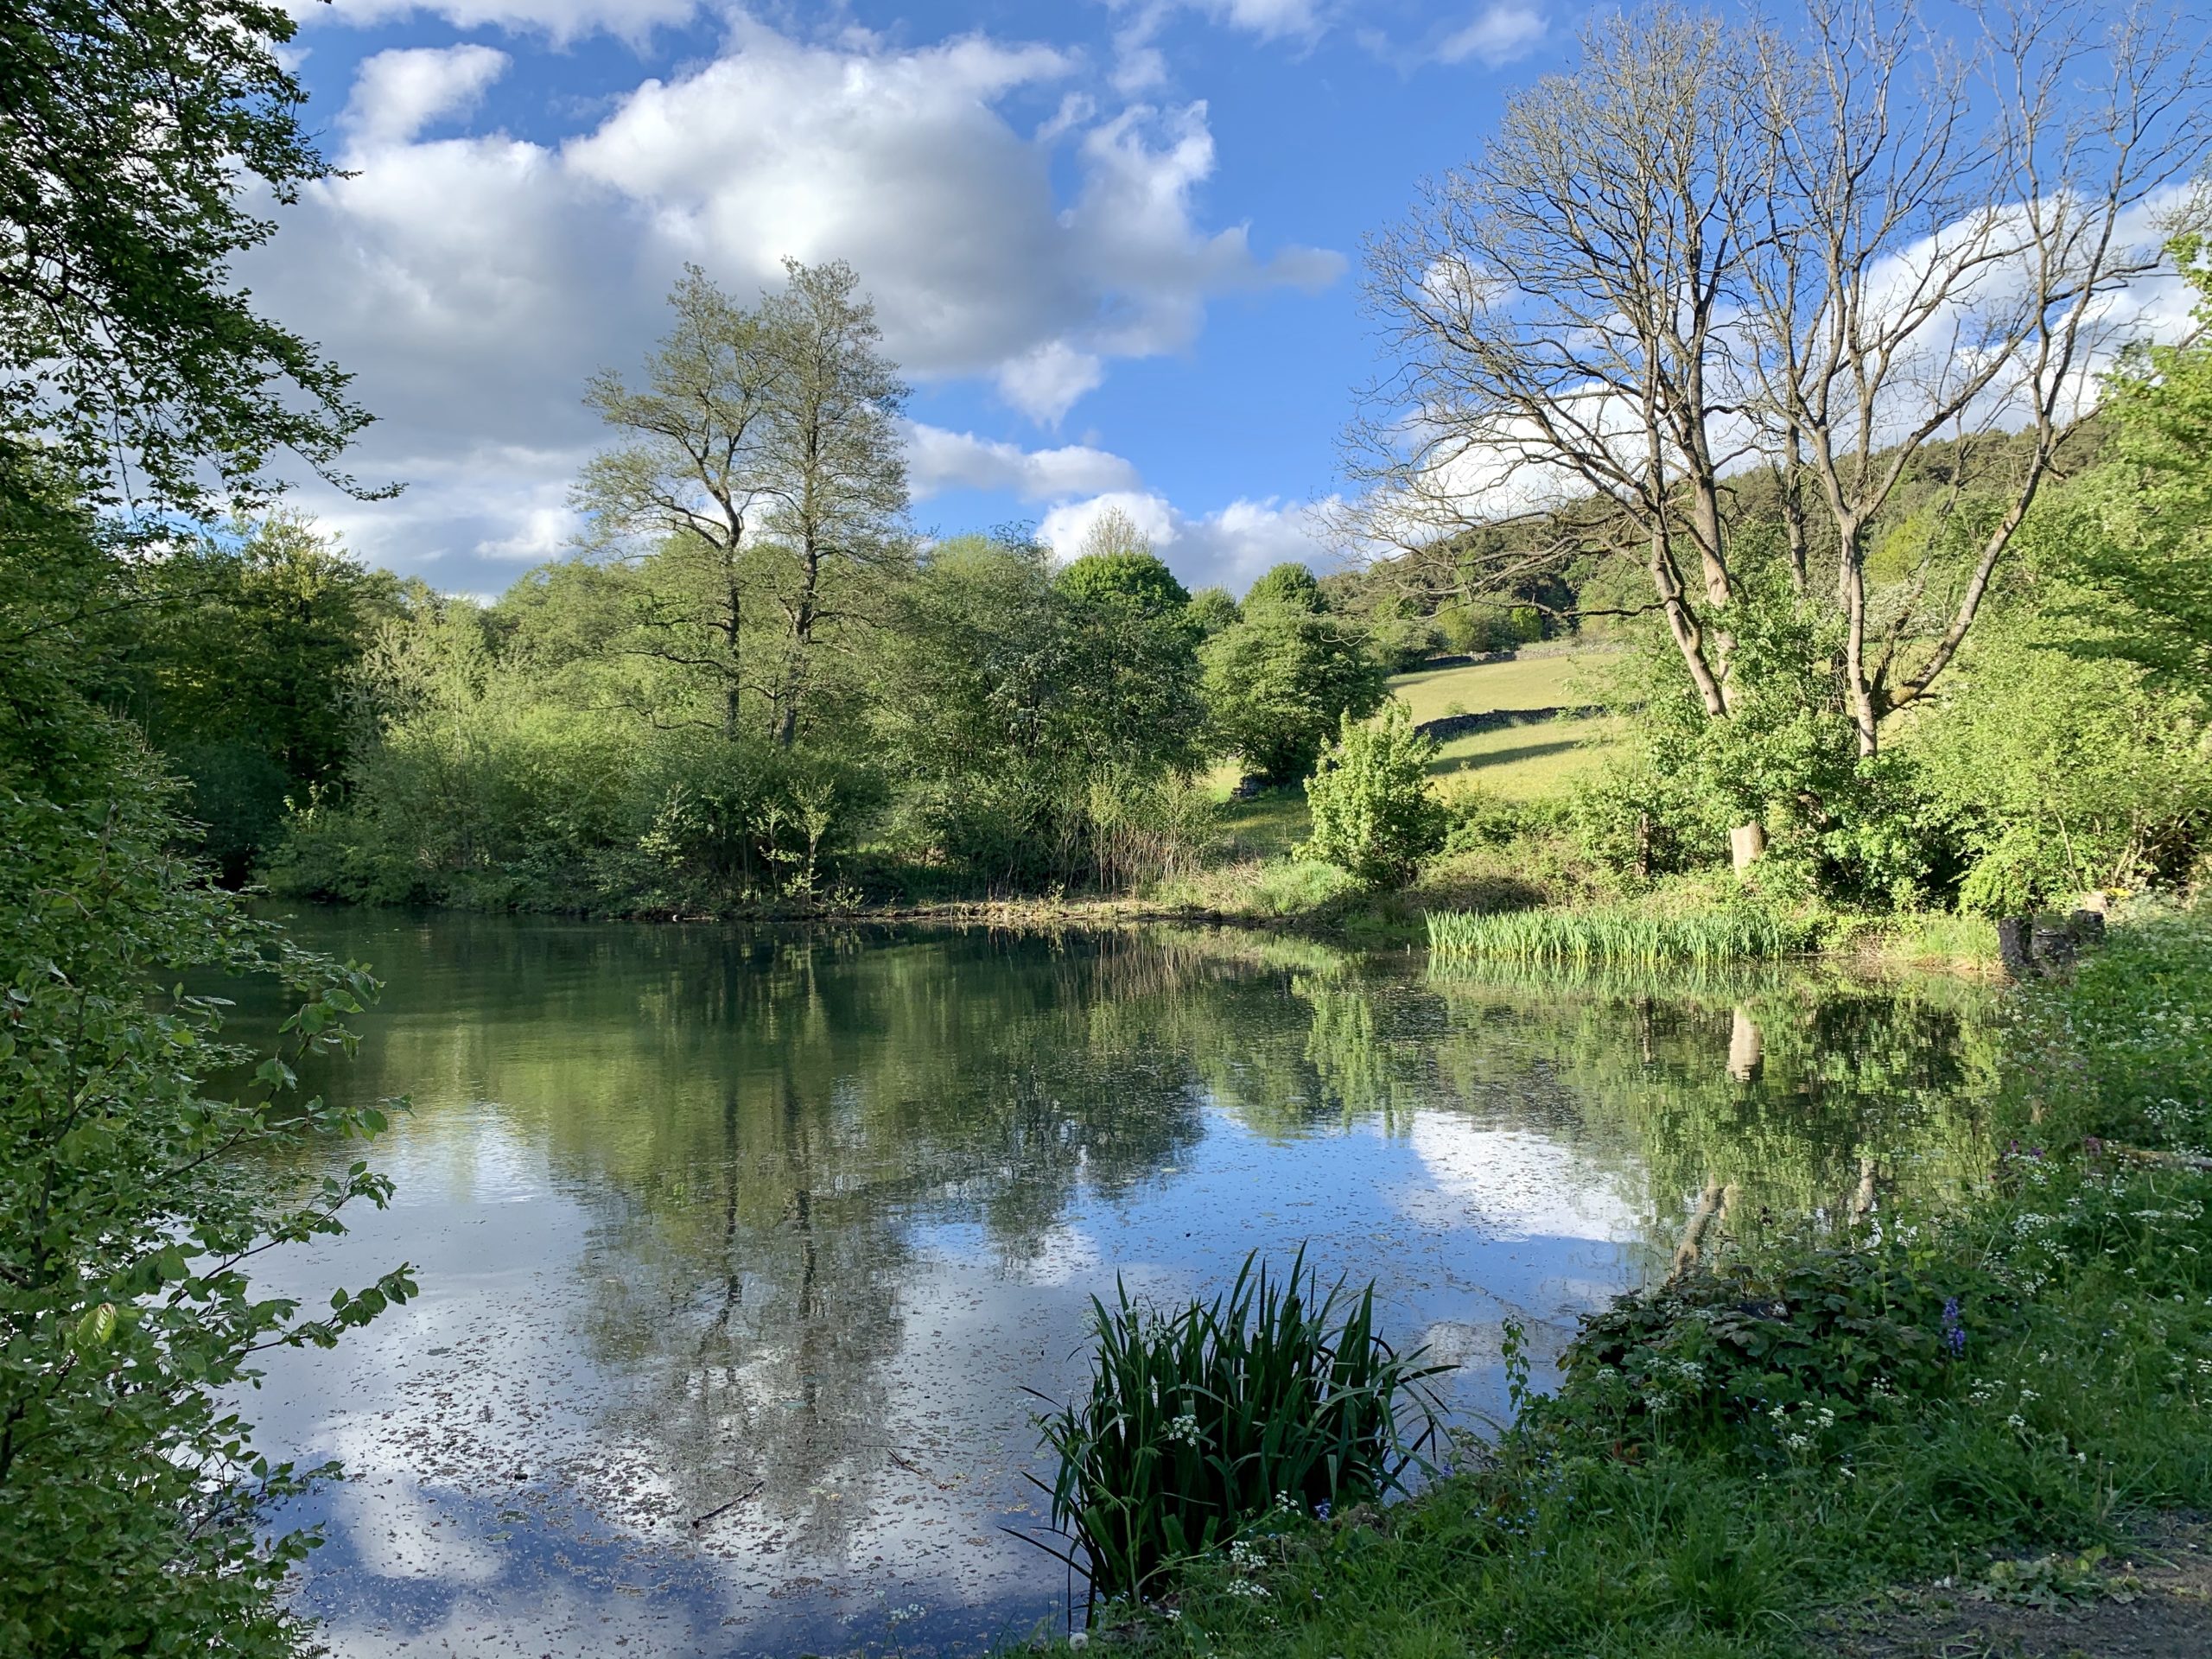 23 Reasons Why Matlock is the Best Place to Live